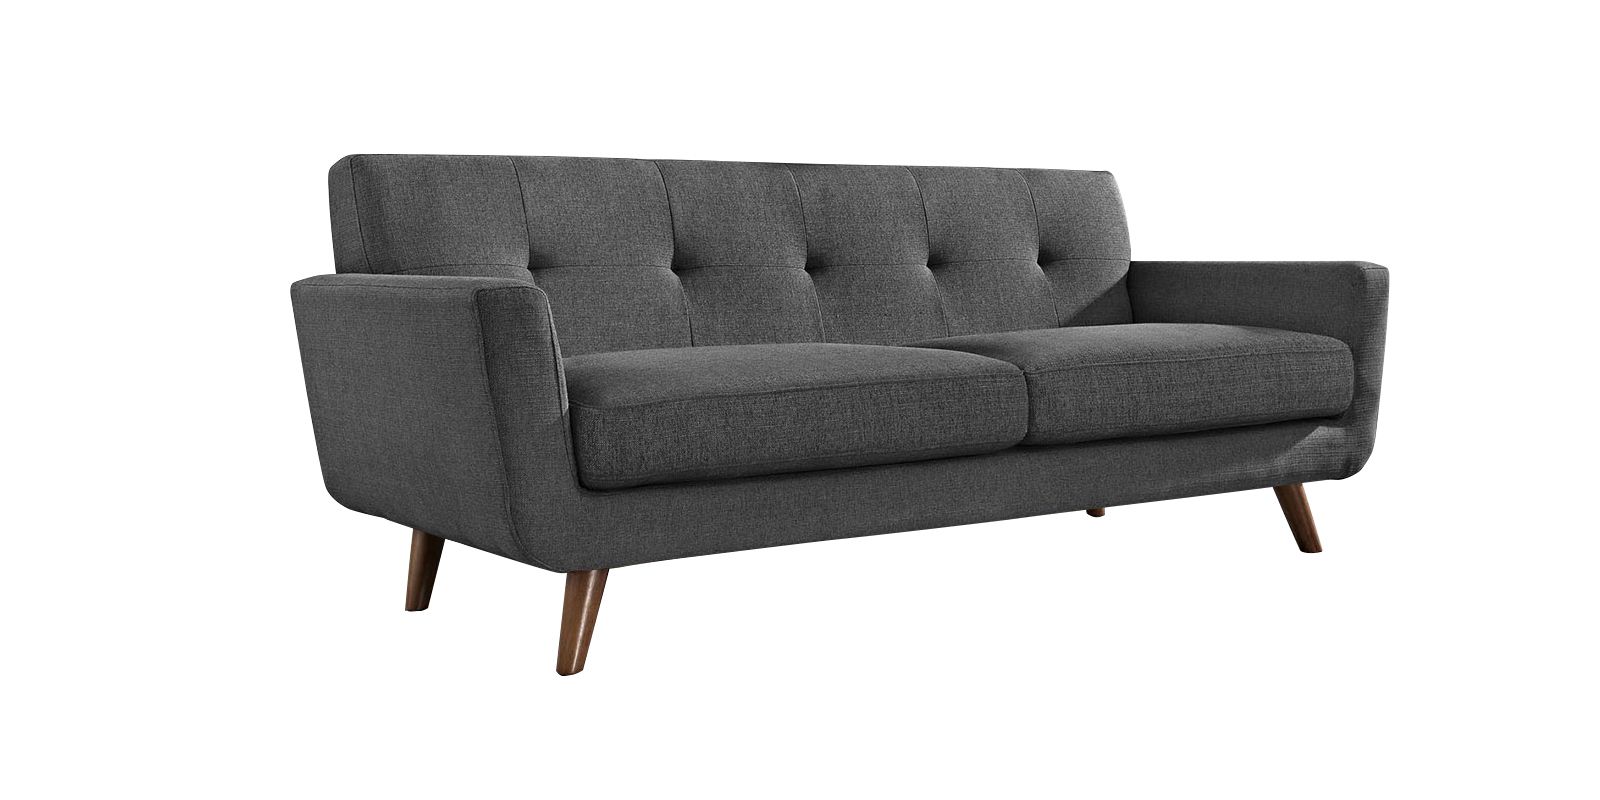 Mid Century Classic 3 Seater Sofa In Grey Colour – Dreamzz Furniture |  Online Furniture Shop Regarding Mid Century 3 Seat Couches (View 8 of 15)